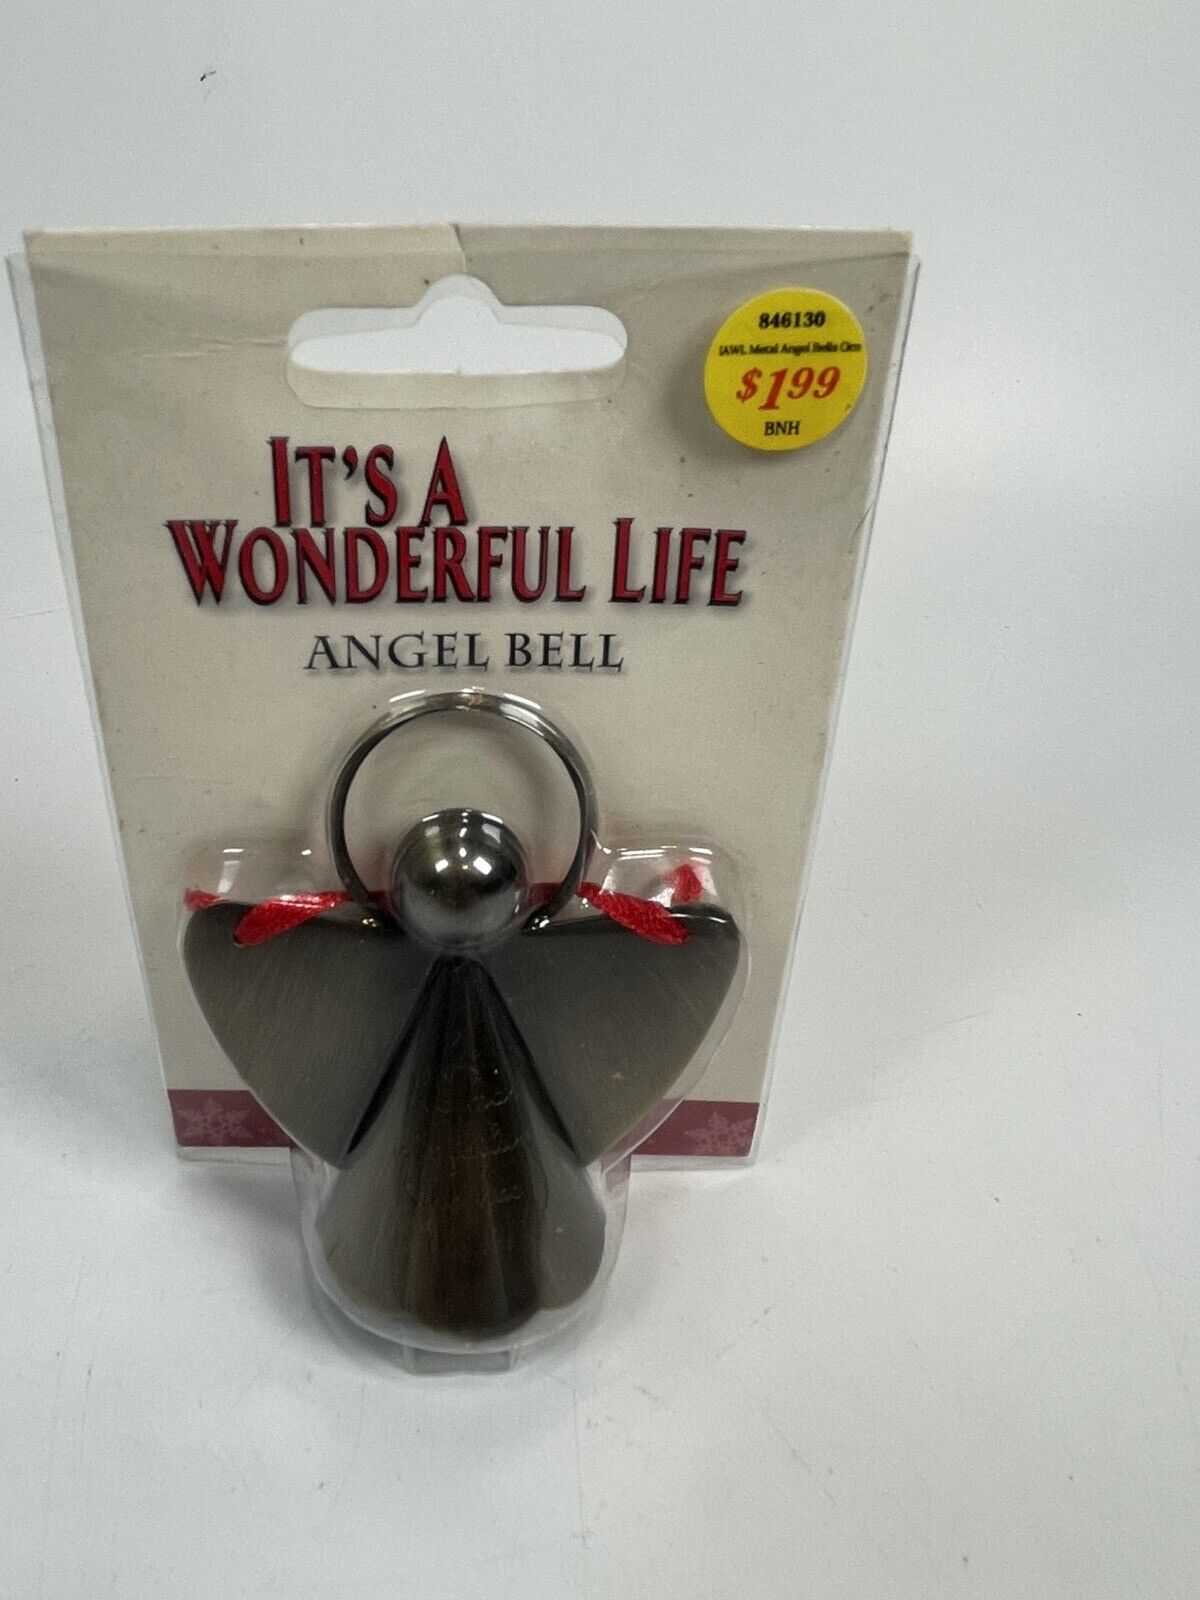 VNTG ENESCO  'IT'S A WONDERFUL LIFE' ANGEL BELL ORNAMENT NEW IN PACKAGE